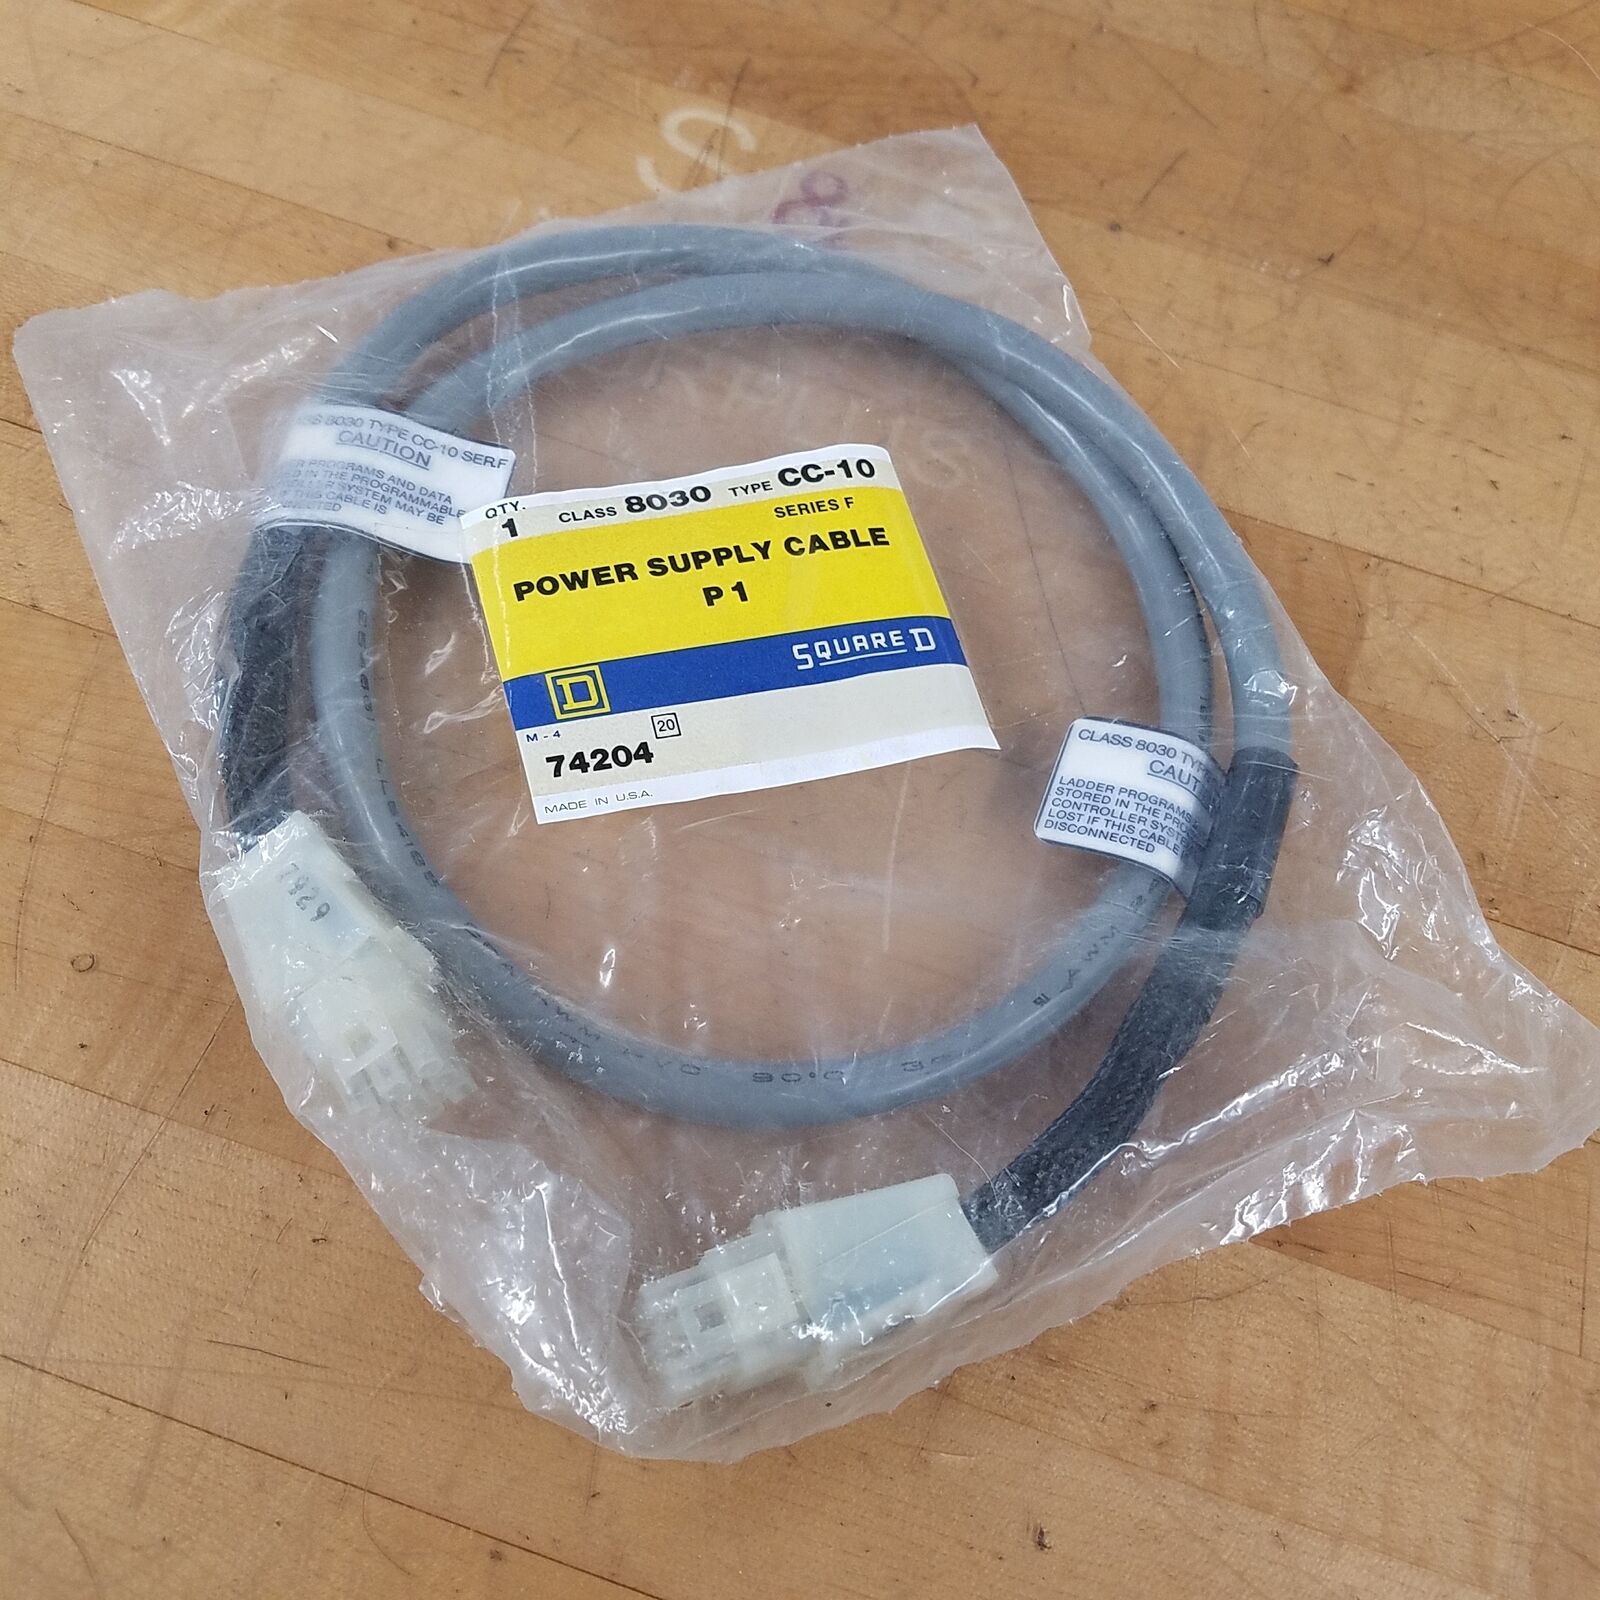 Square D Symax 8030-CC-10 Series F Power Supply Cable, P1 Connector, 3FT Long